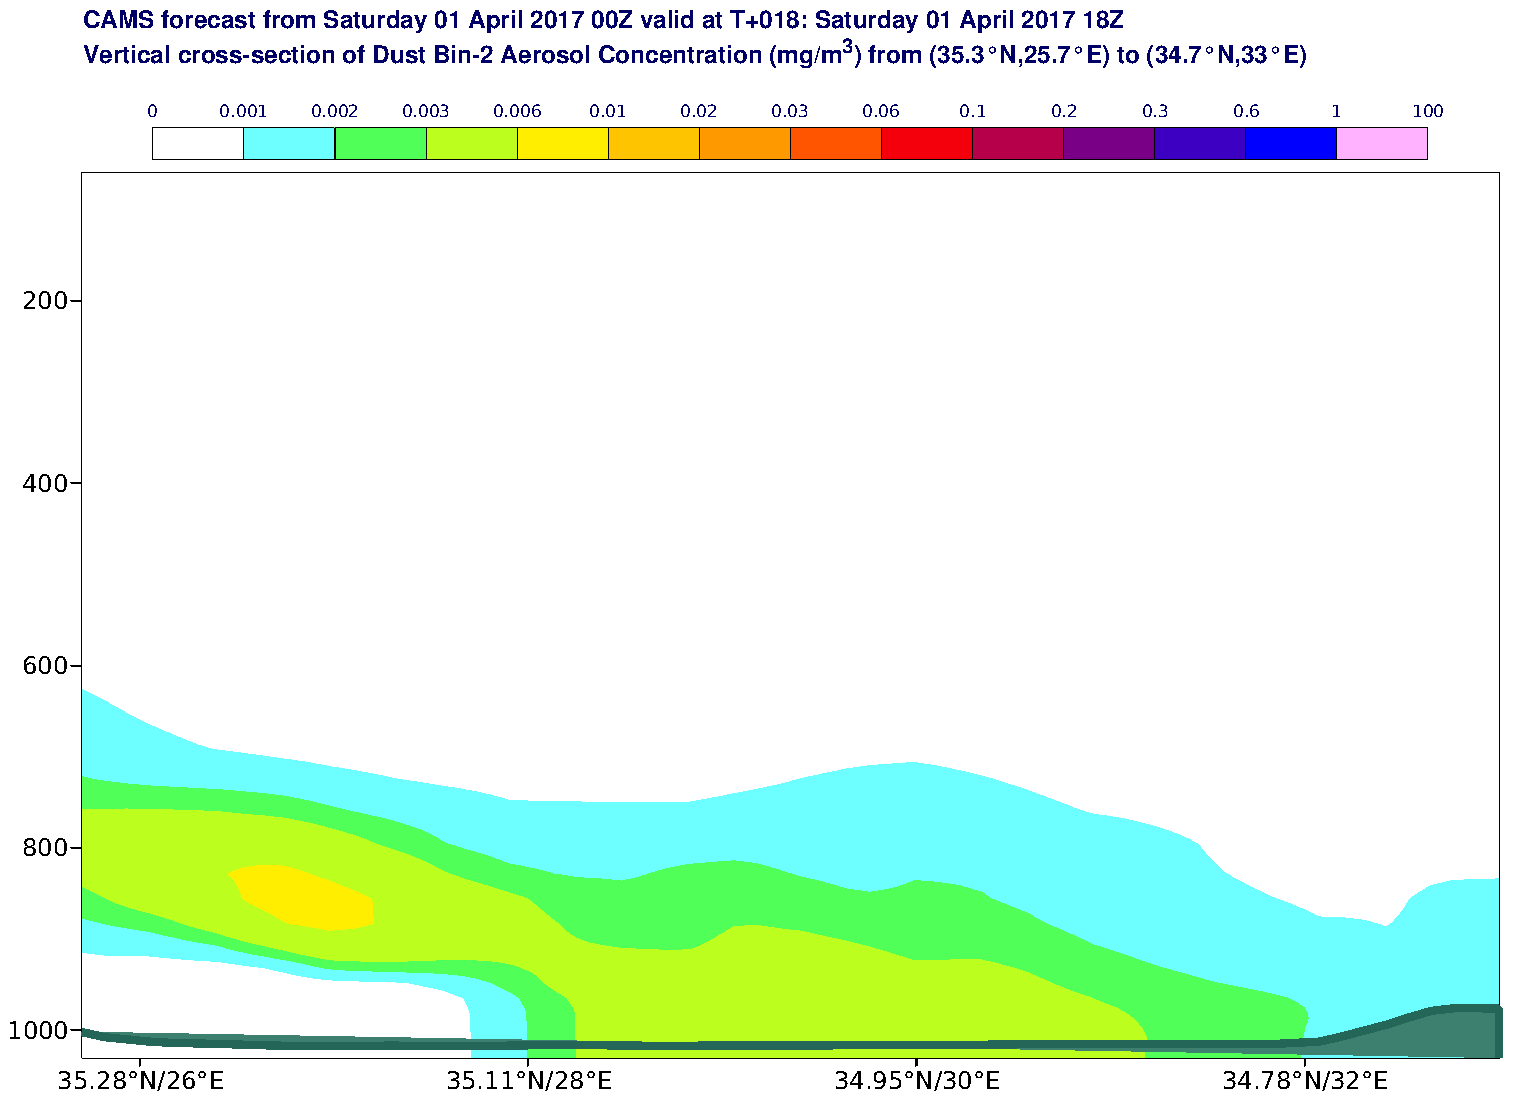 Vertical cross-section of Dust Bin-2 Aerosol Concentration (mg/m3) valid at T18 - 2017-04-01 18:00